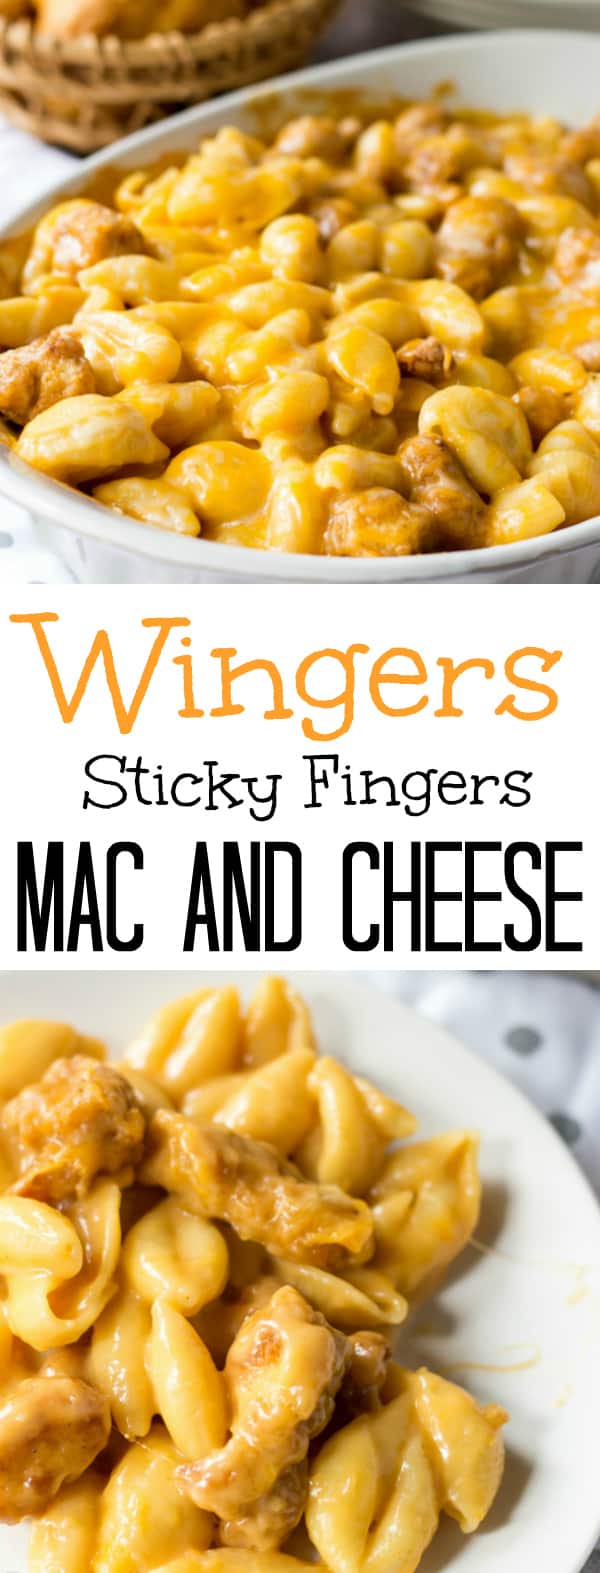 Wingers Sticky Fingers Mac and Cheese collage with words in the middle